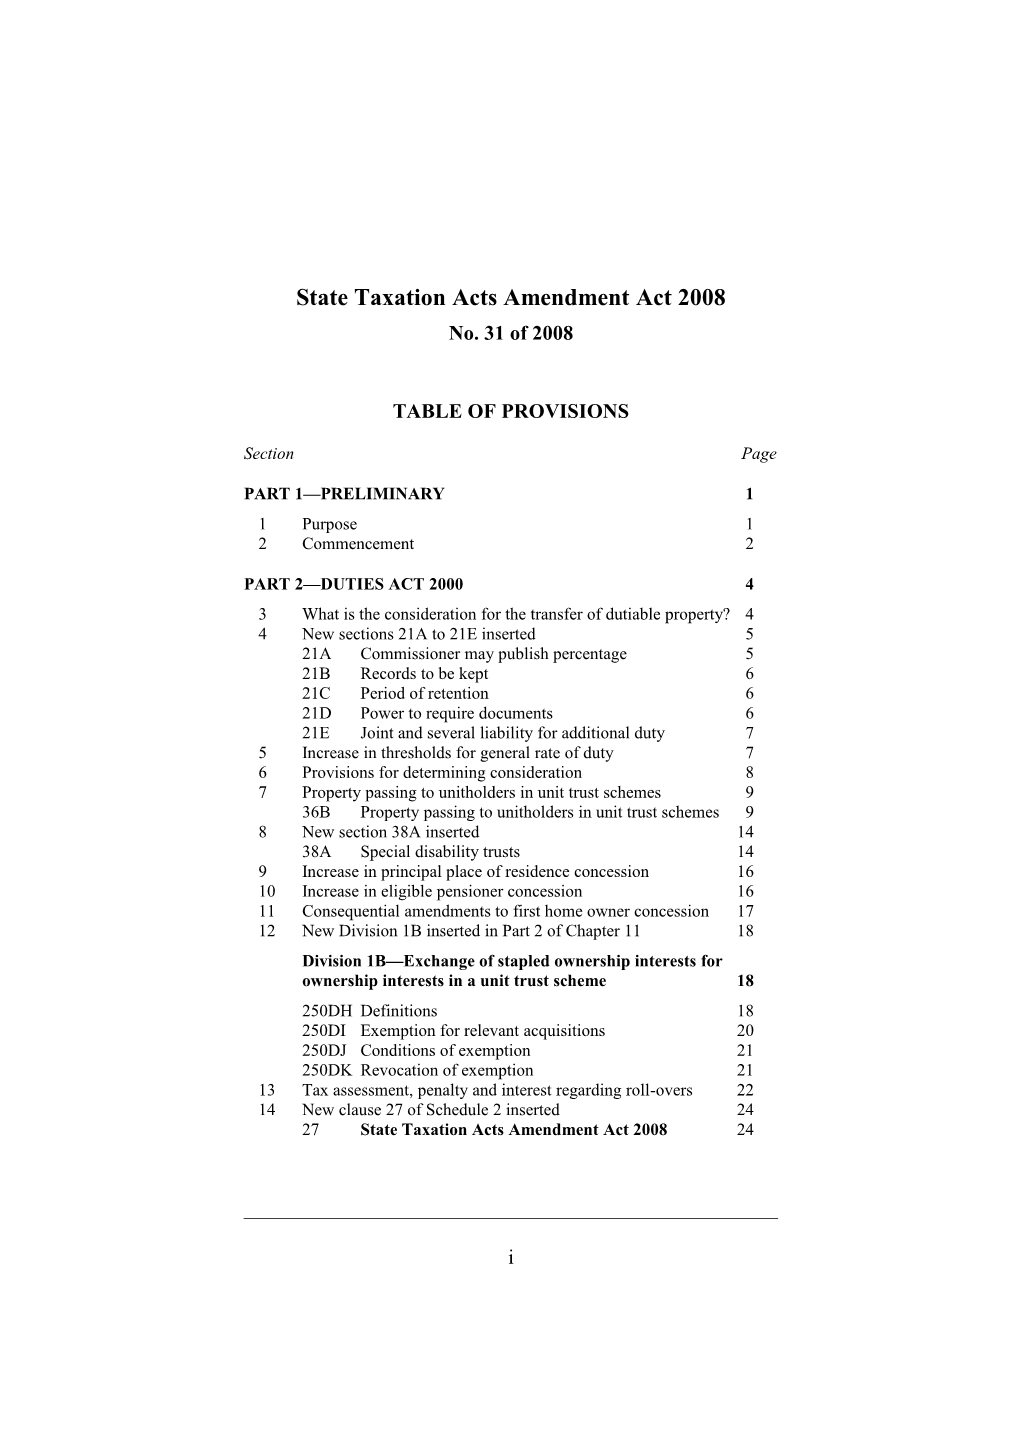 State Taxation Acts Amendment Act 2008